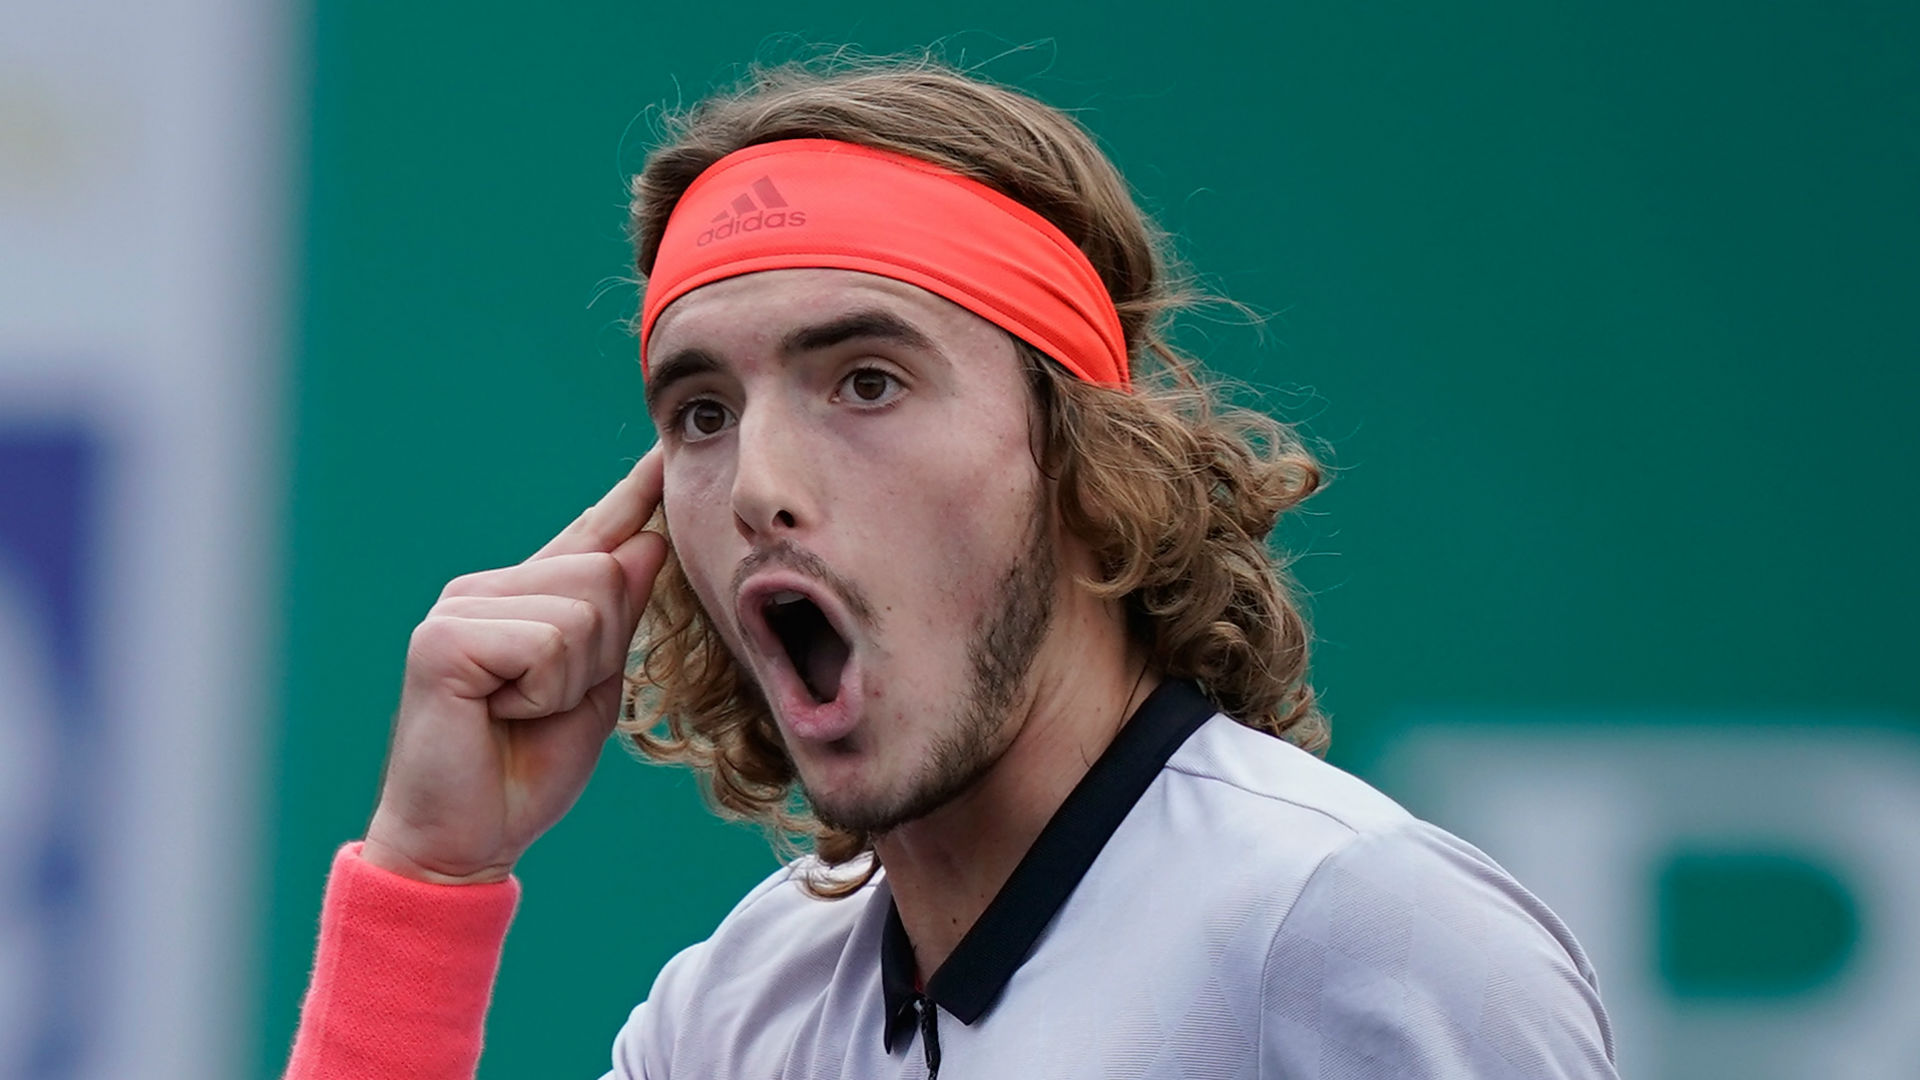 Youngsters Stefanos Tsitsipas and Denis Shapovalov won their respective matches at the Stockholm Open on Wednesday.